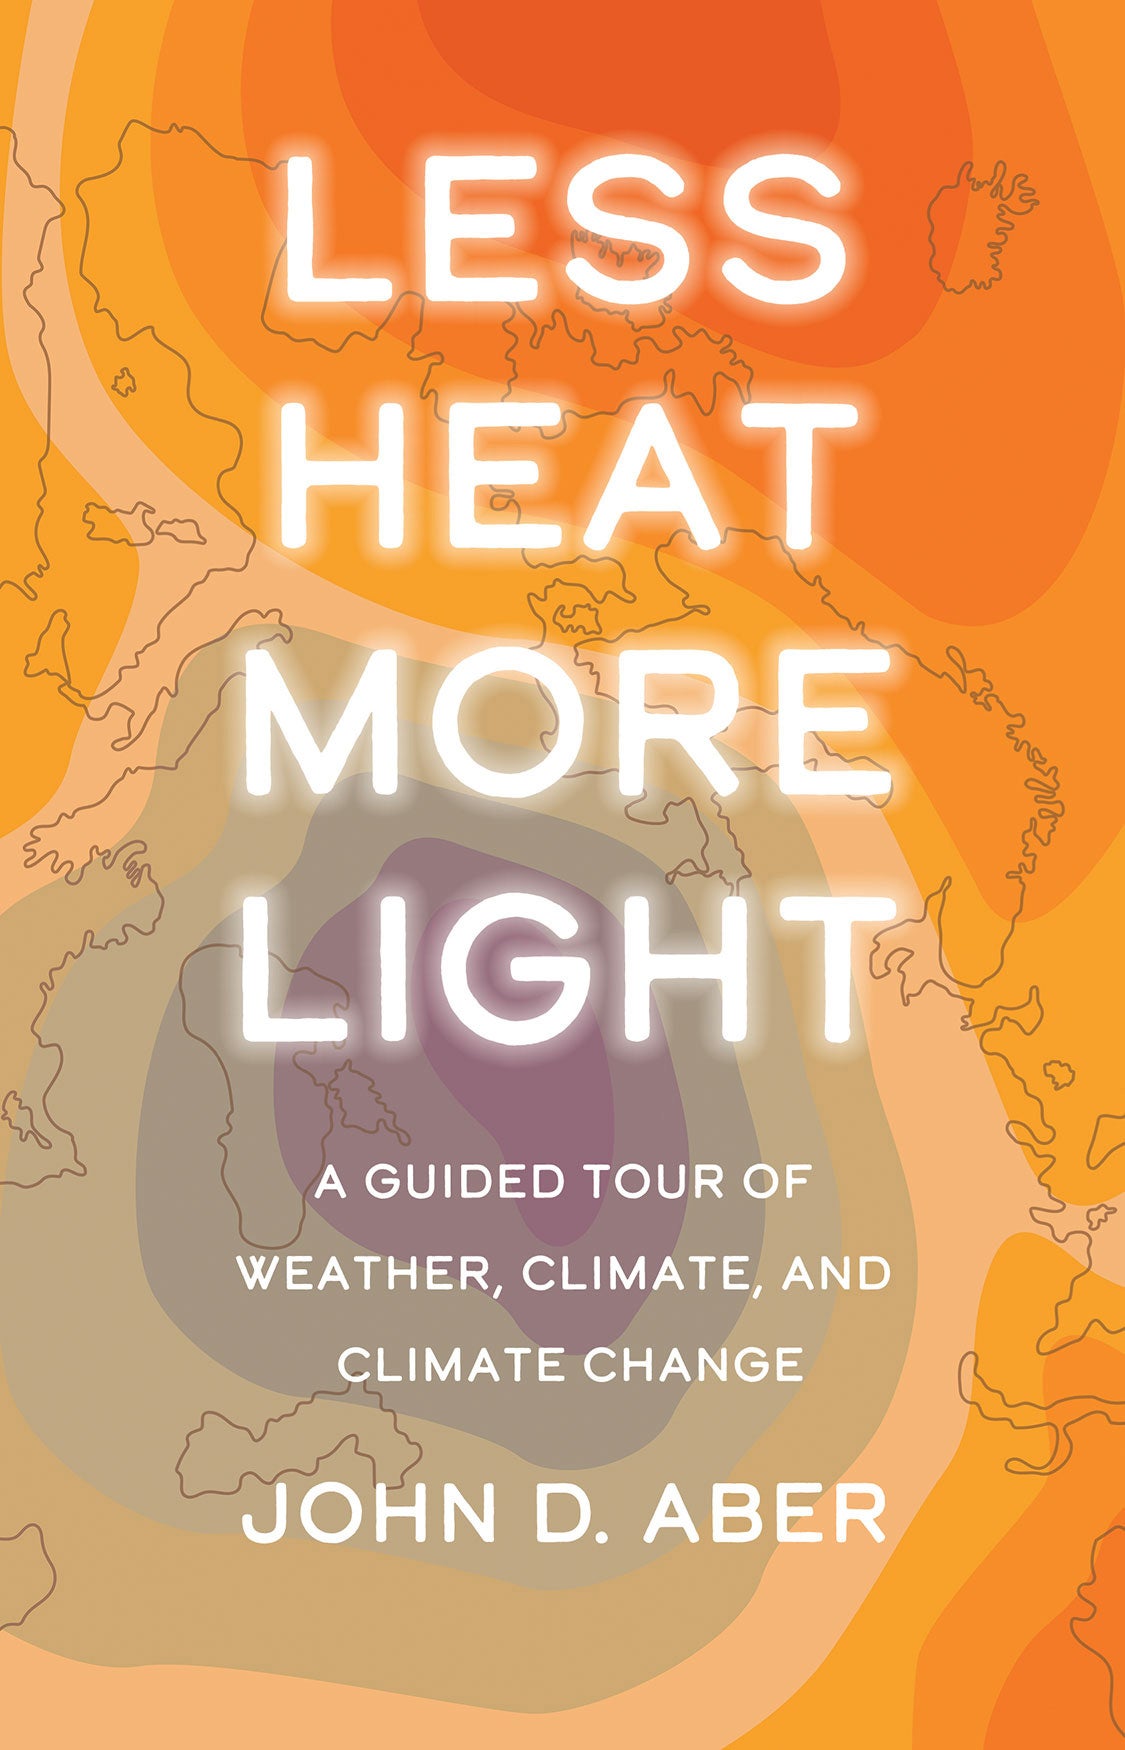 Less Heat More Light book cover